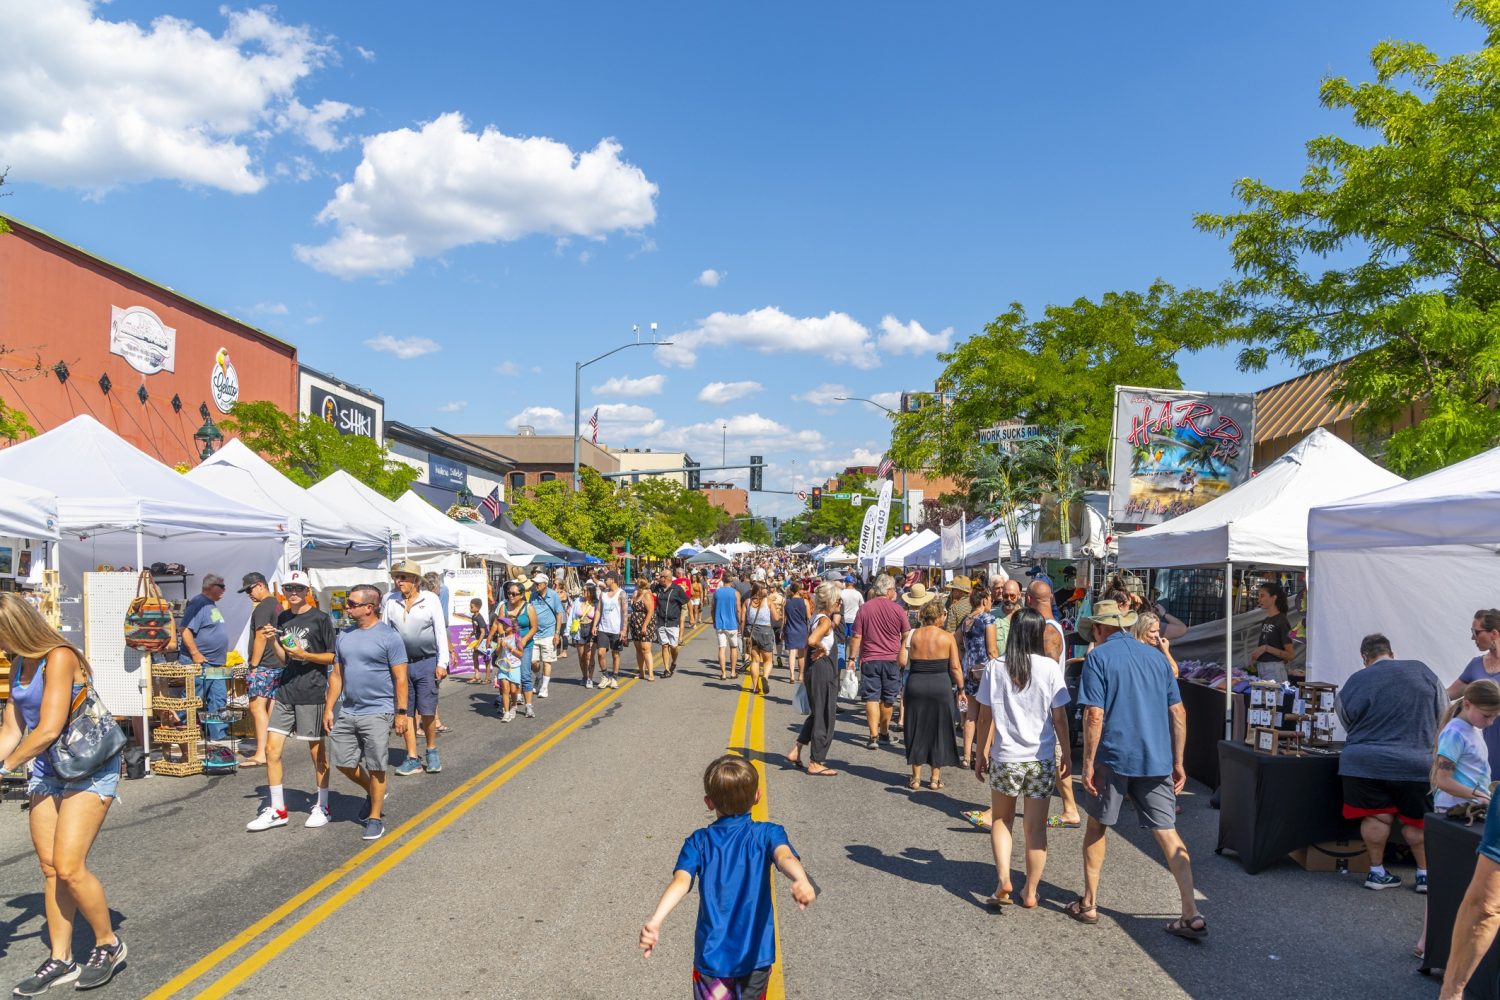 The annual Arts and Crafts Street Fair with vendors selling food, gifts and art products along main street Sherman Avenue, and through city park in the lakefront tourist resort town of Coeur d’Alene, Idaho.… Read More